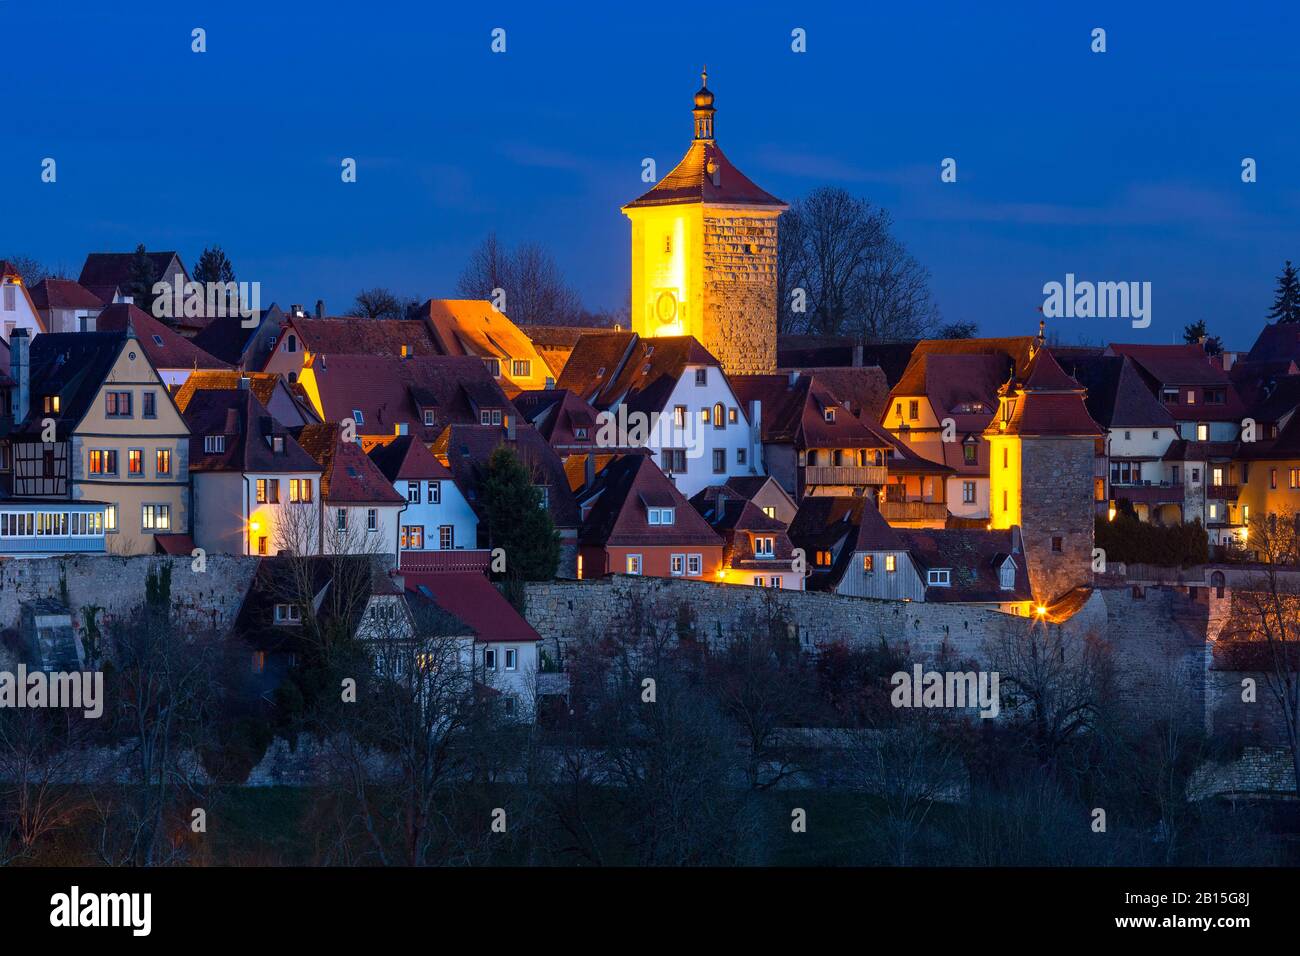 Night aerial view of roofs, towers and town wall in medieval Old Town of Rothenburg ob der Tauber, Bavaria, southern Germany Stock Photo